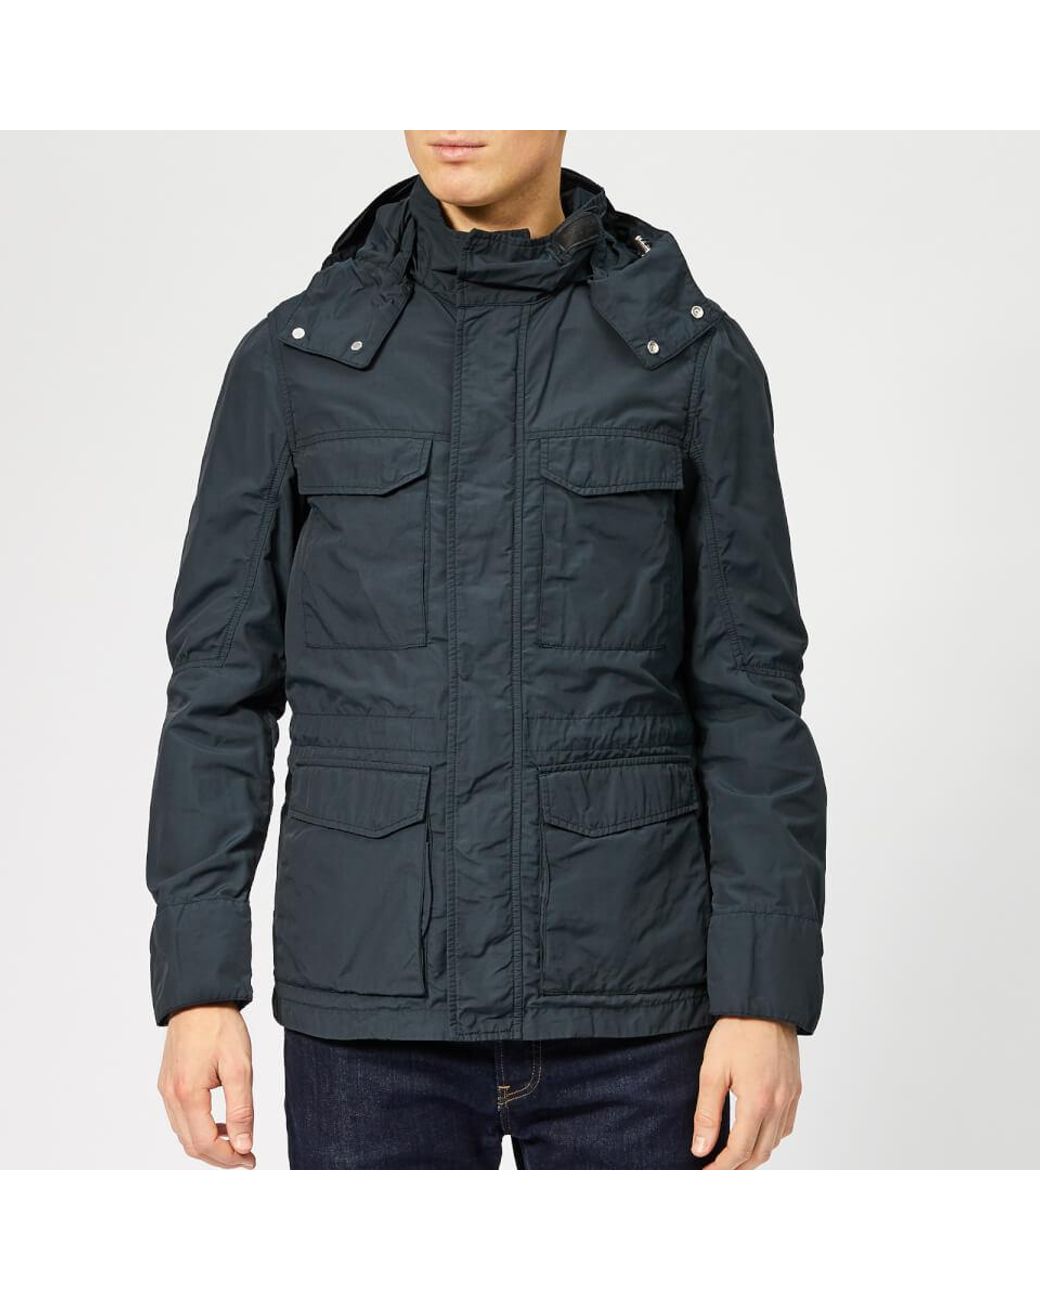 Woolrich Cotton Utility Field Jacket in Navy (Blue) for Men - Save 71% ...